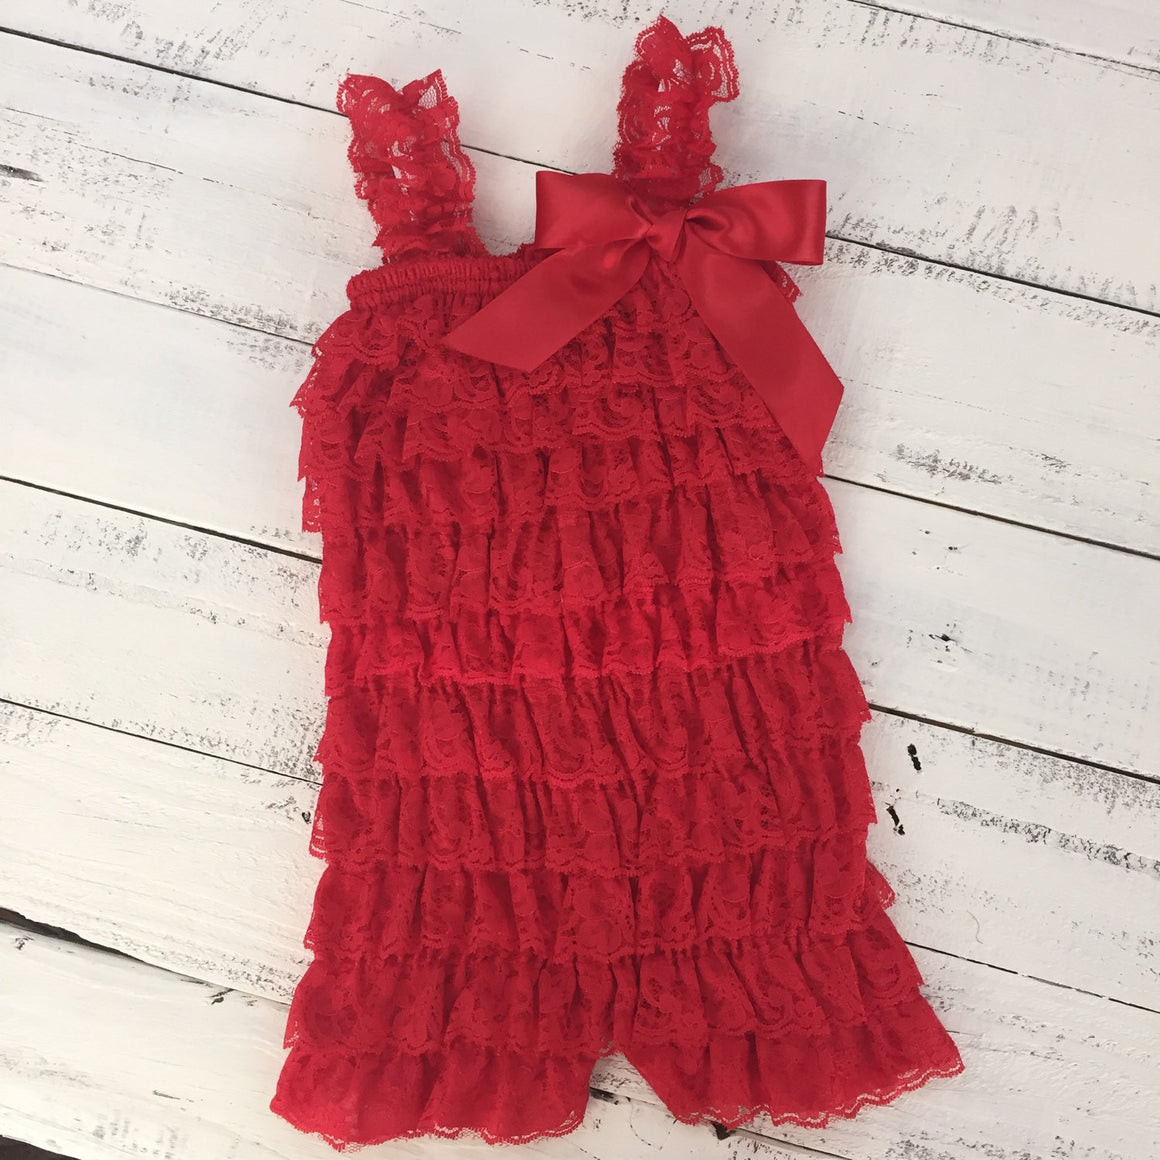 Lace Petti Romper - Red, Green, Ivory, Champagne - HoneyLoveBoutique